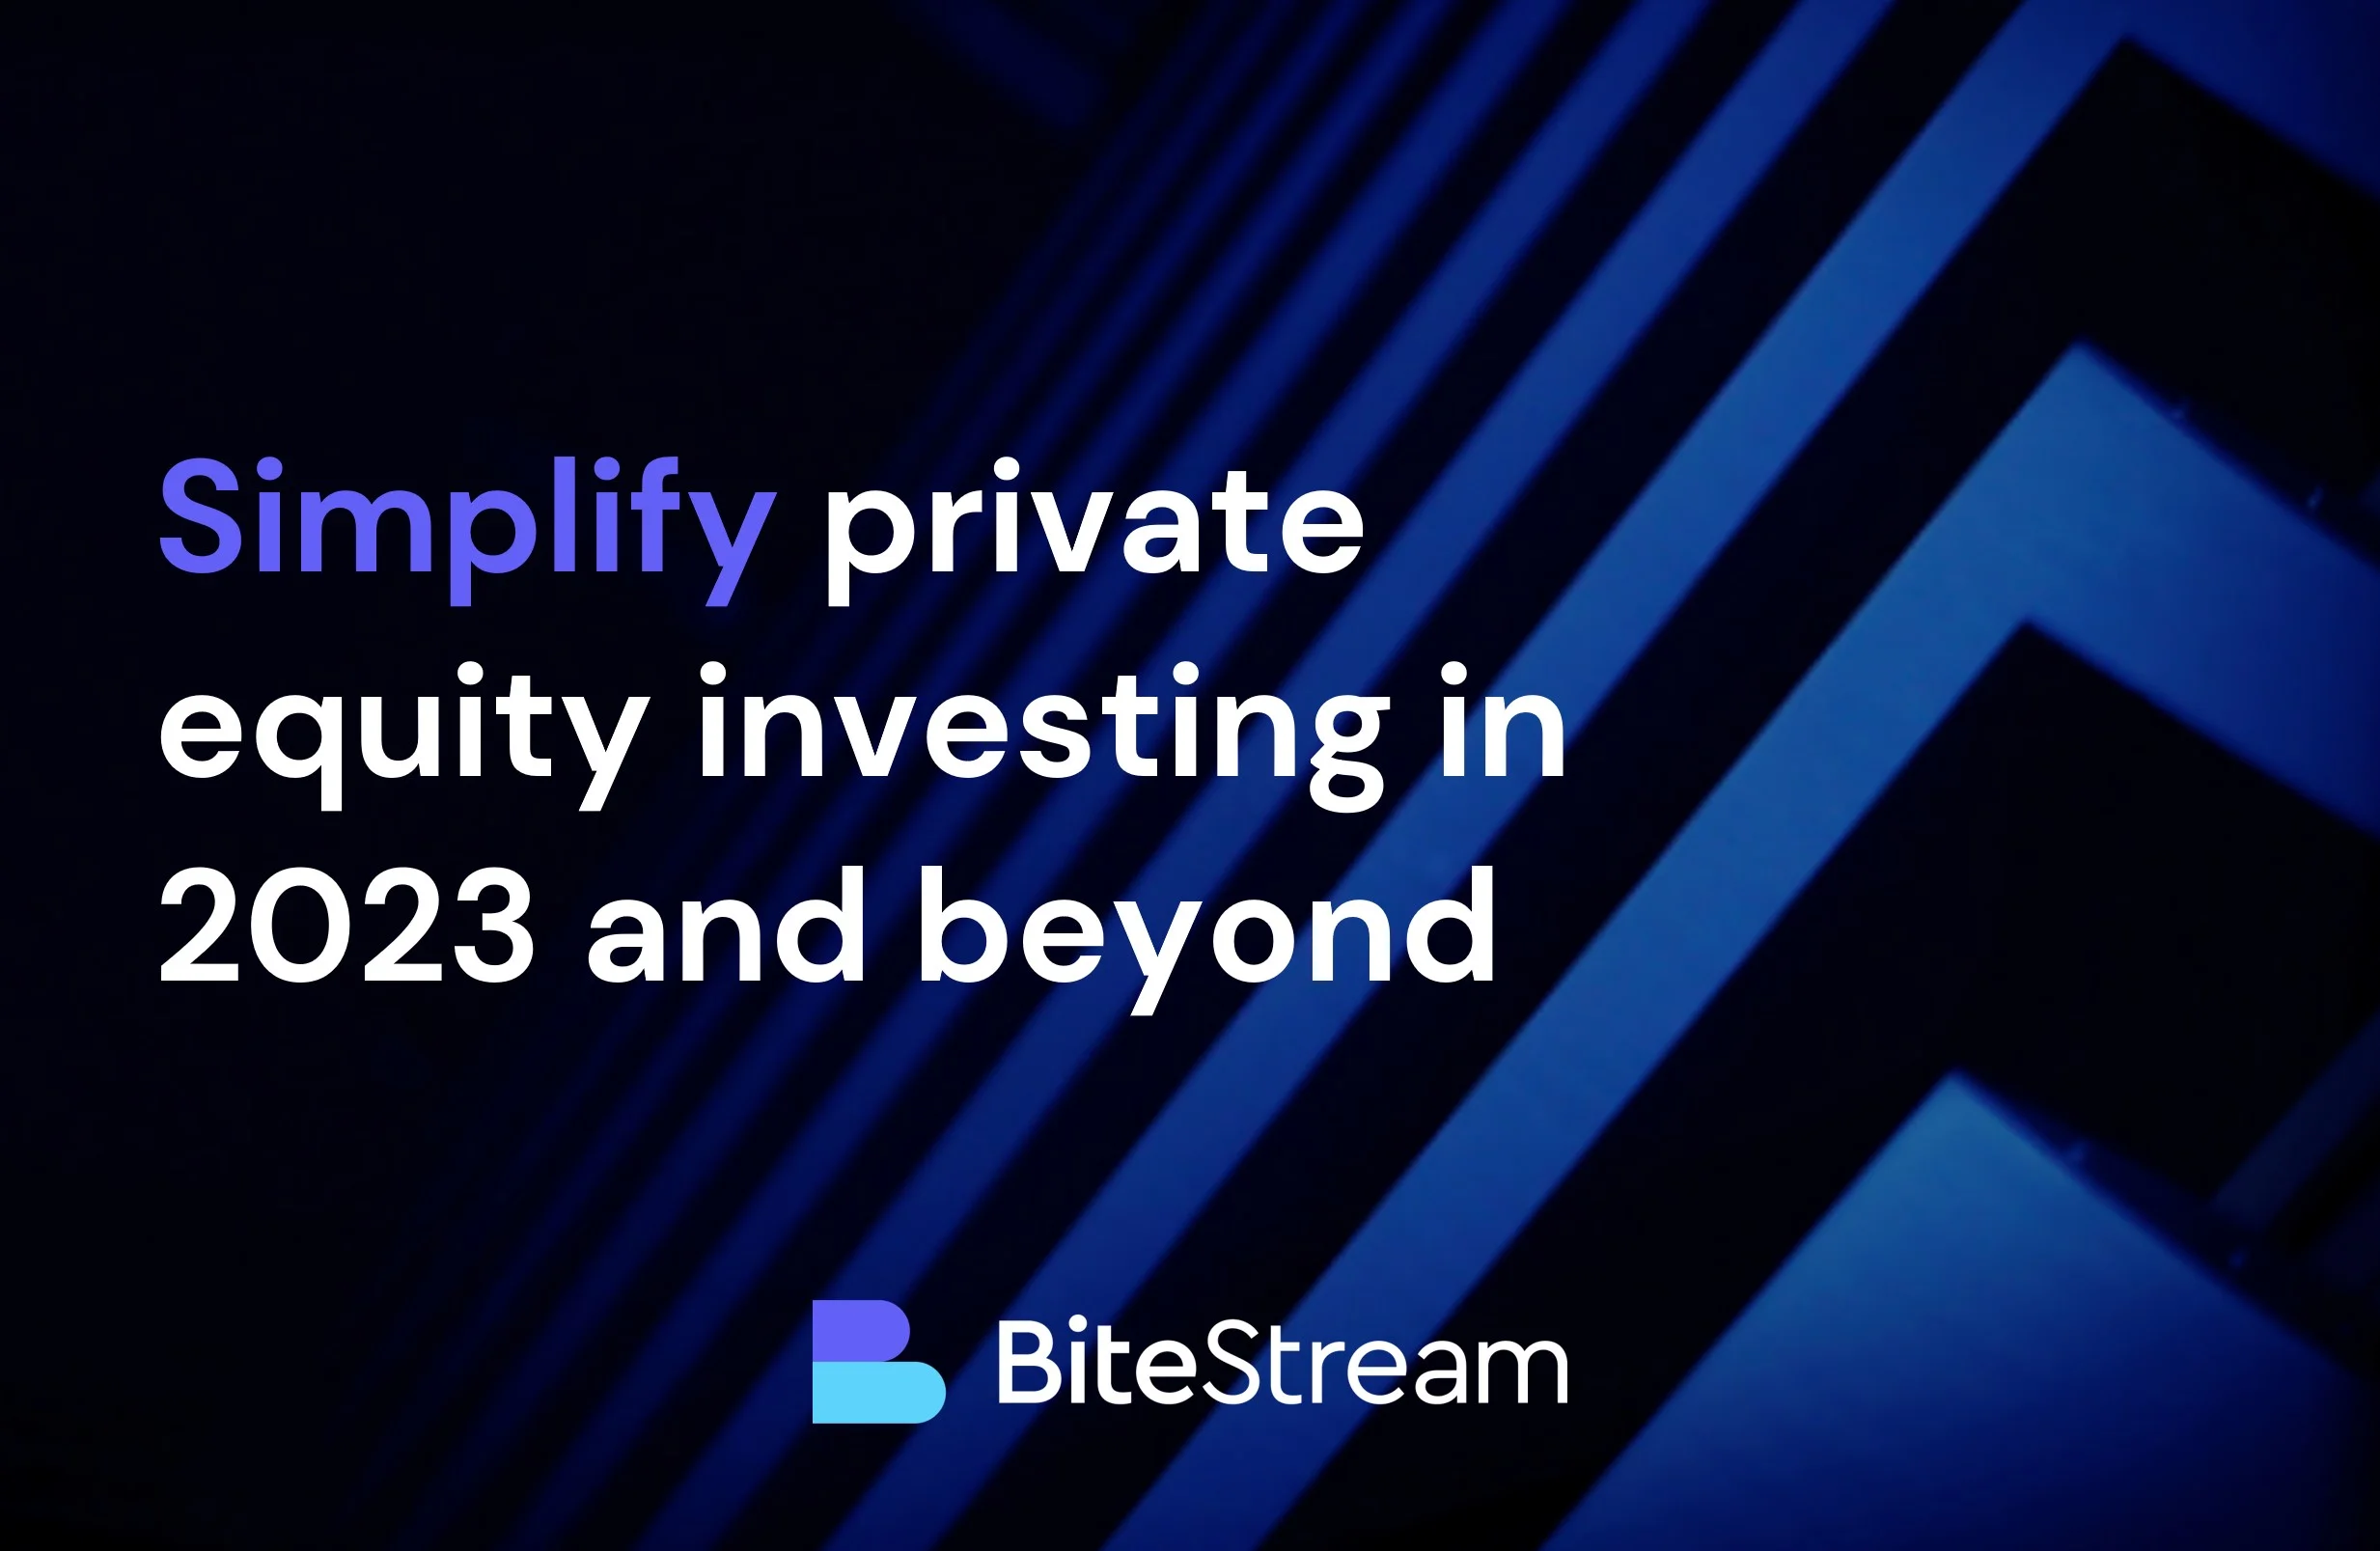 Simplify private equity investing in 2023 and beyond